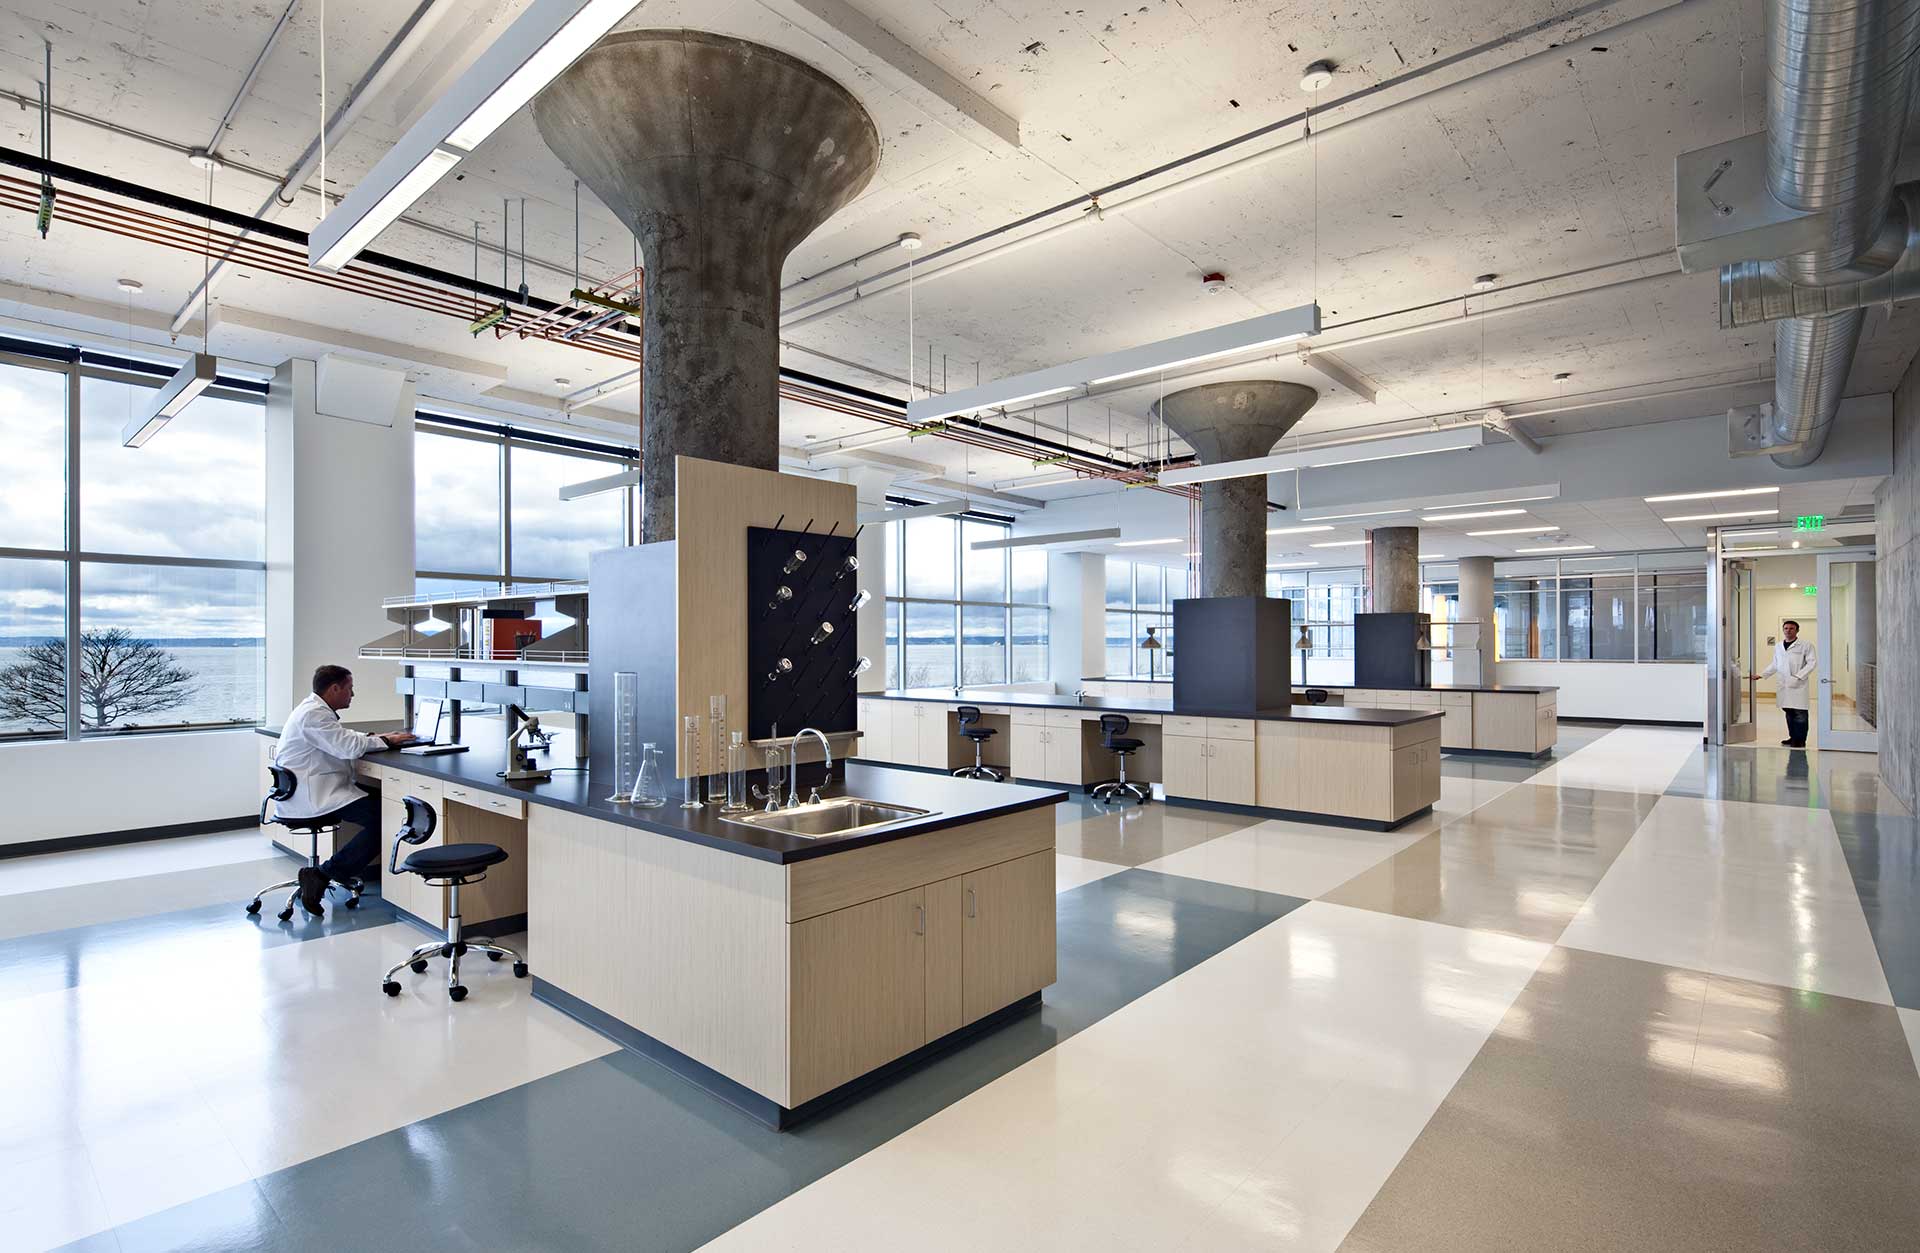 Waterfront Research Center lab